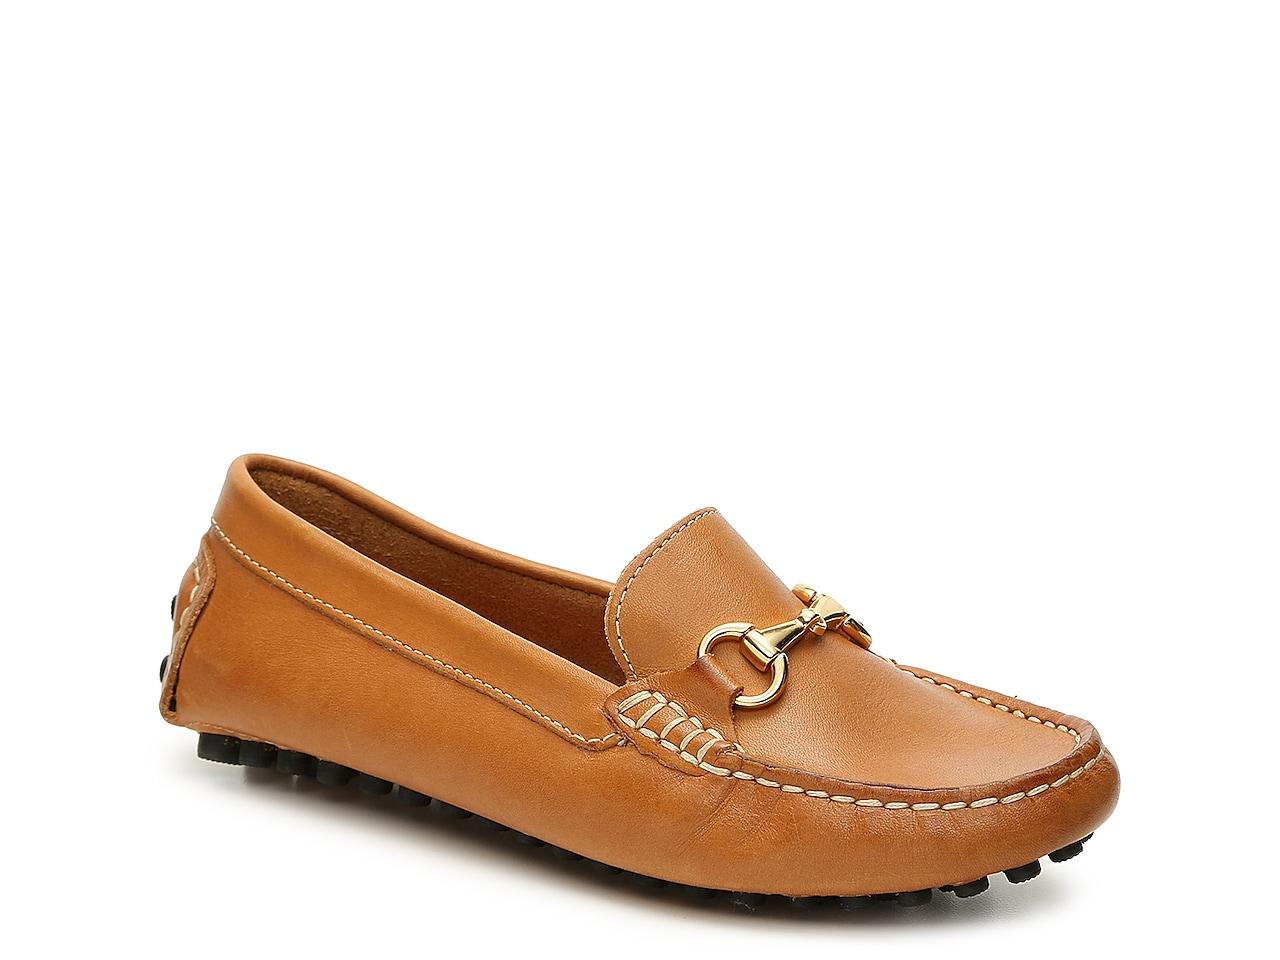 Mercanti Loafers new Zealand, SAVE 32% - lutheranems.com